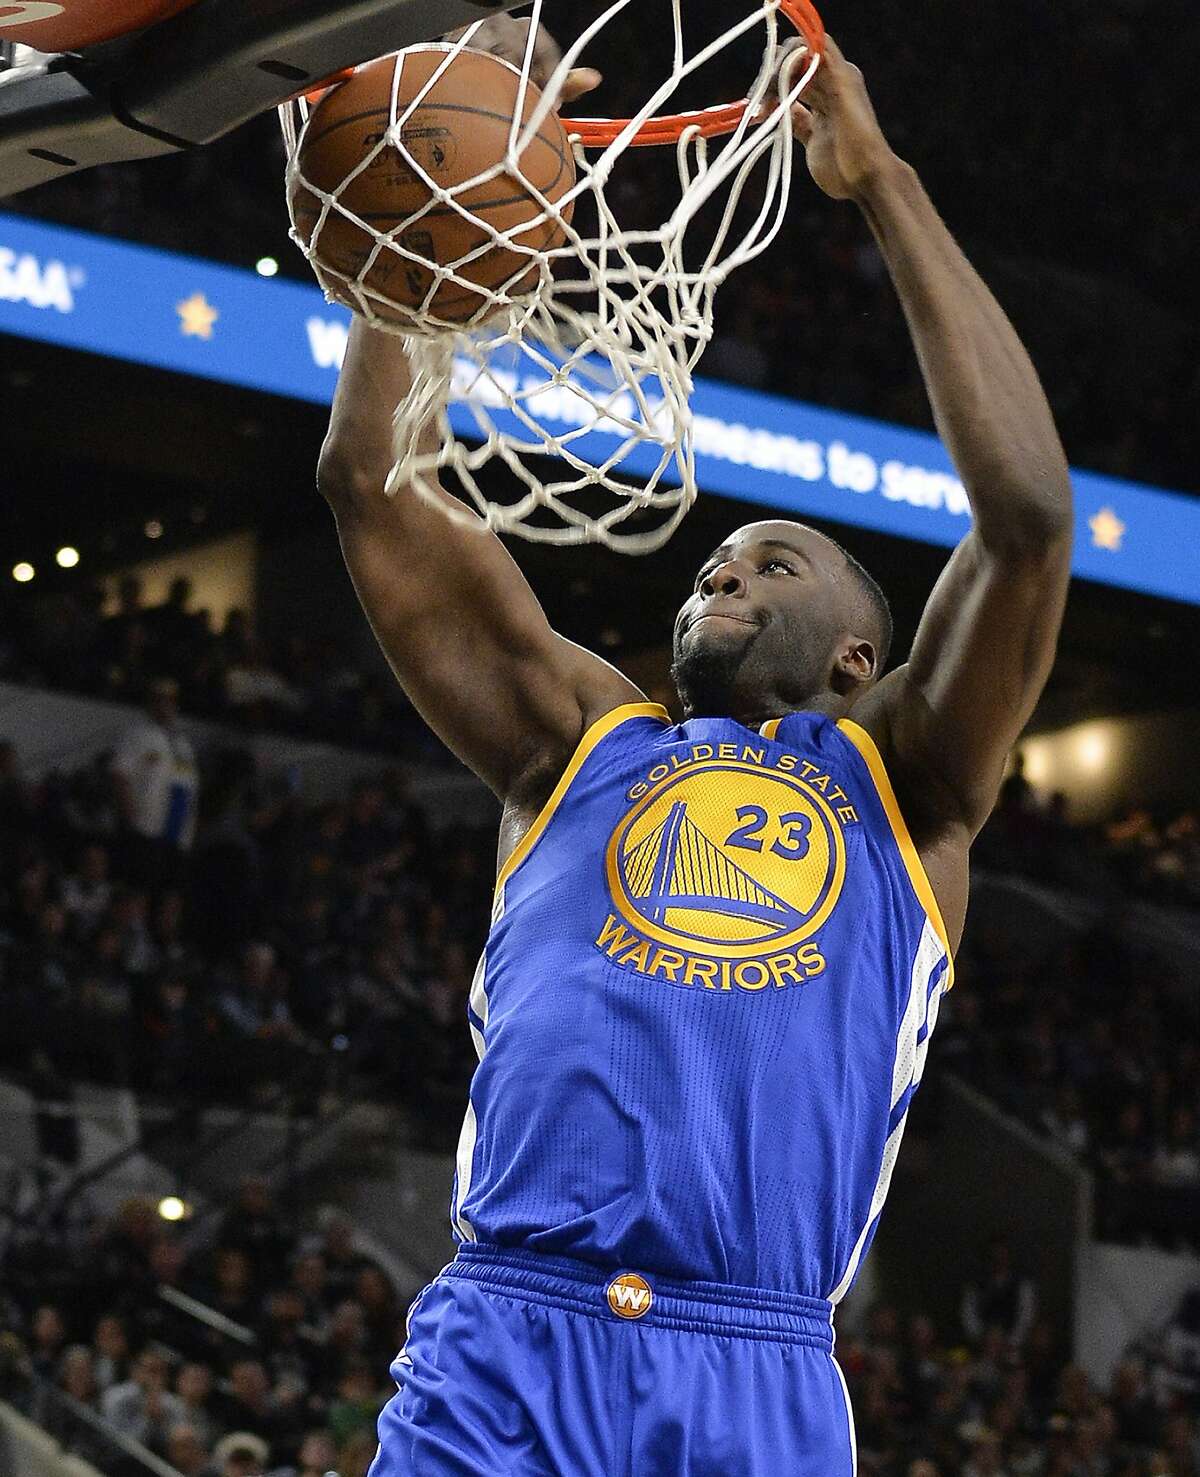 Golden State Warriors forward Draymond Green dunks during the first half of an NBA basketball game against the San Antonio Spurs, Saturday, March 19, 2016, in San Antonio. San Antonio won 87-79. (AP Photo/Darren Abate)